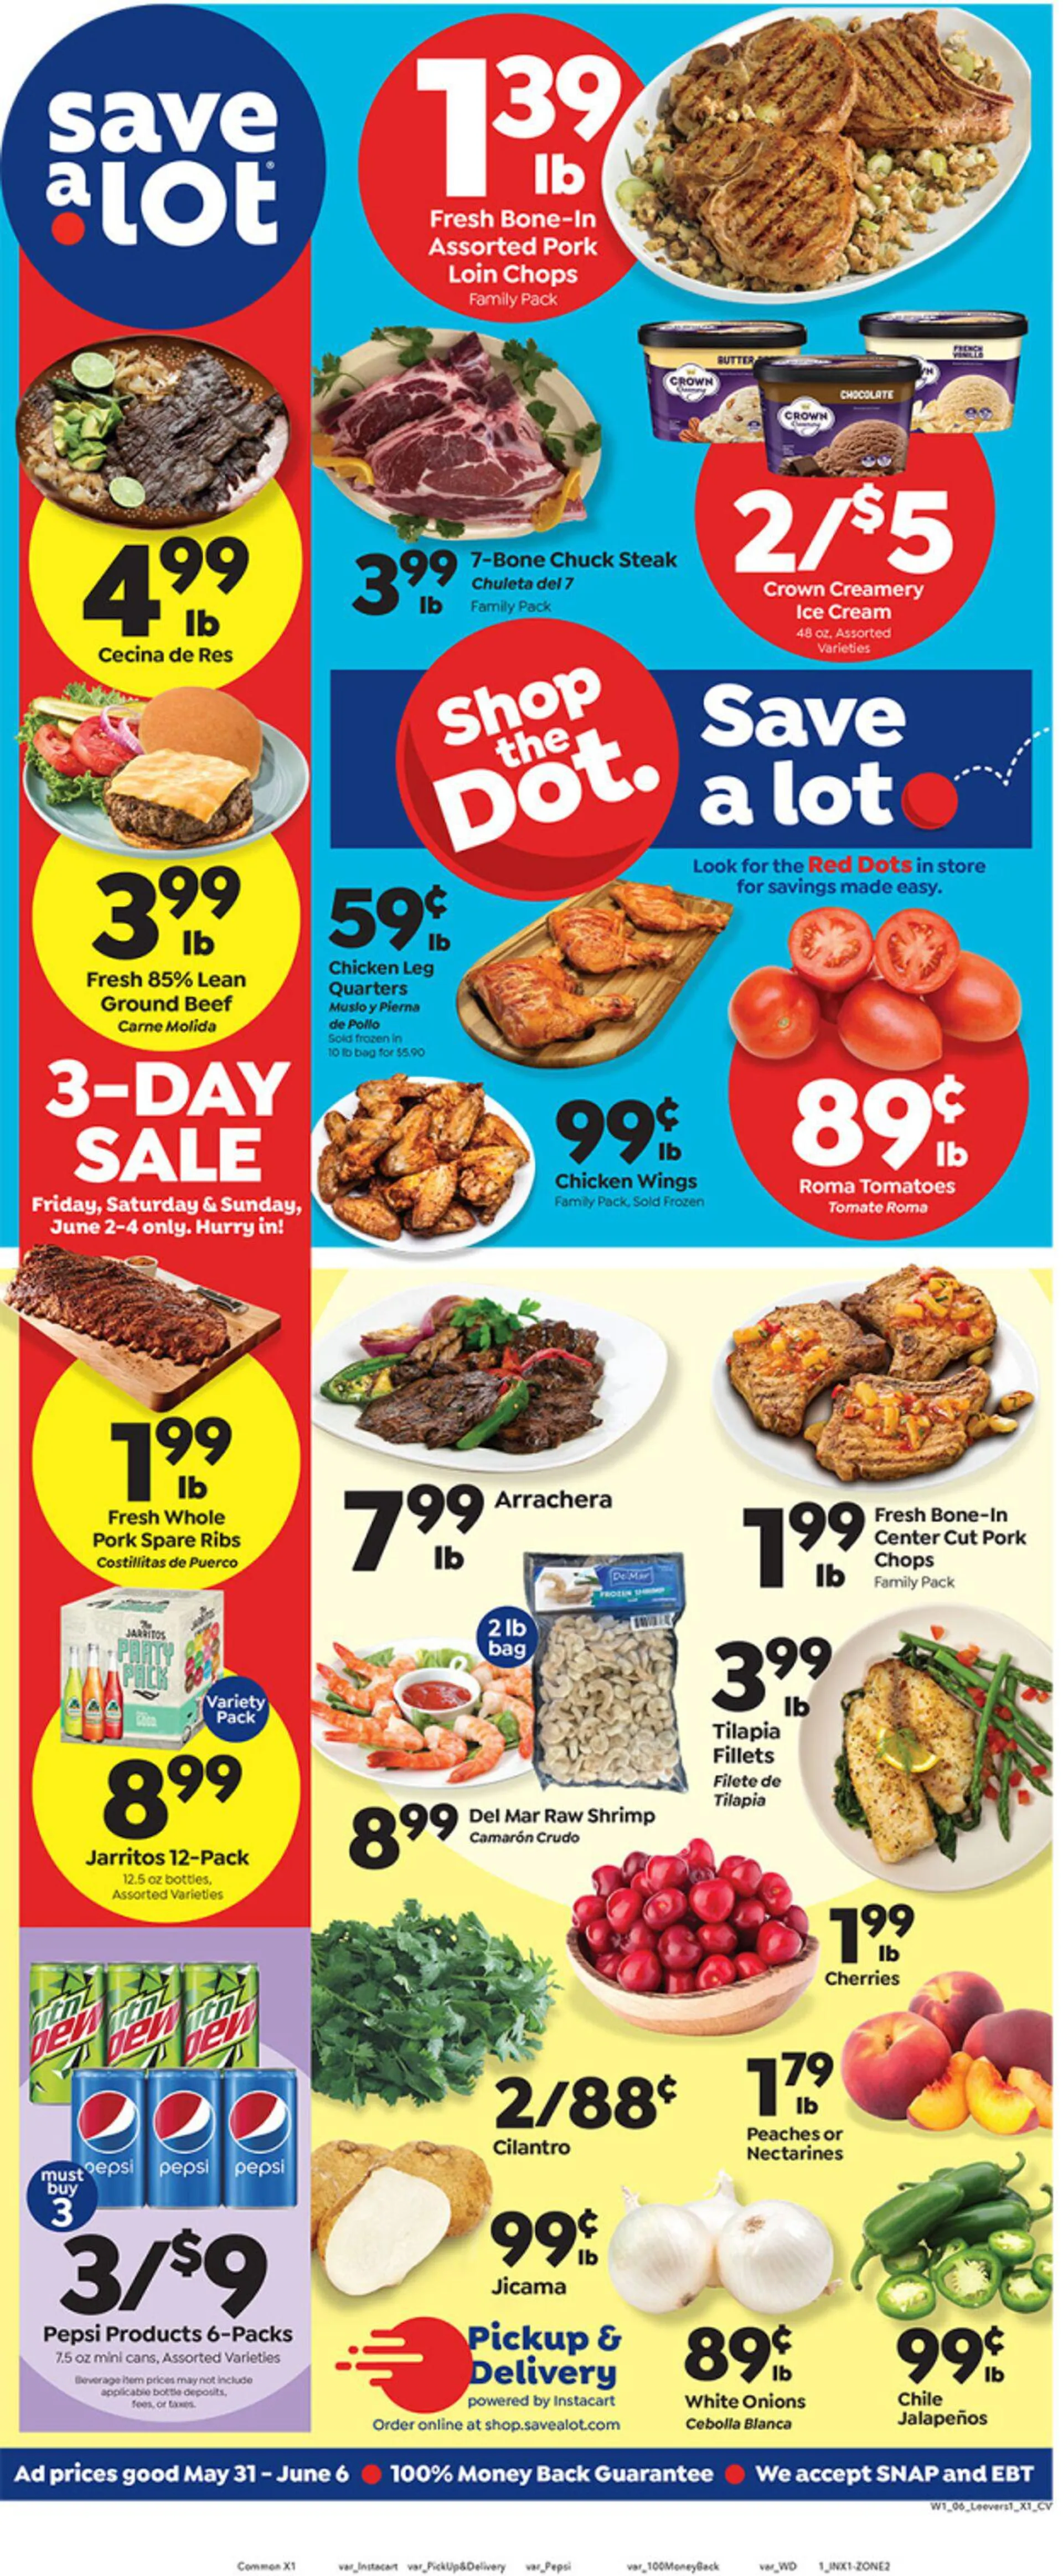 Save a Lot Current weekly ad - 1